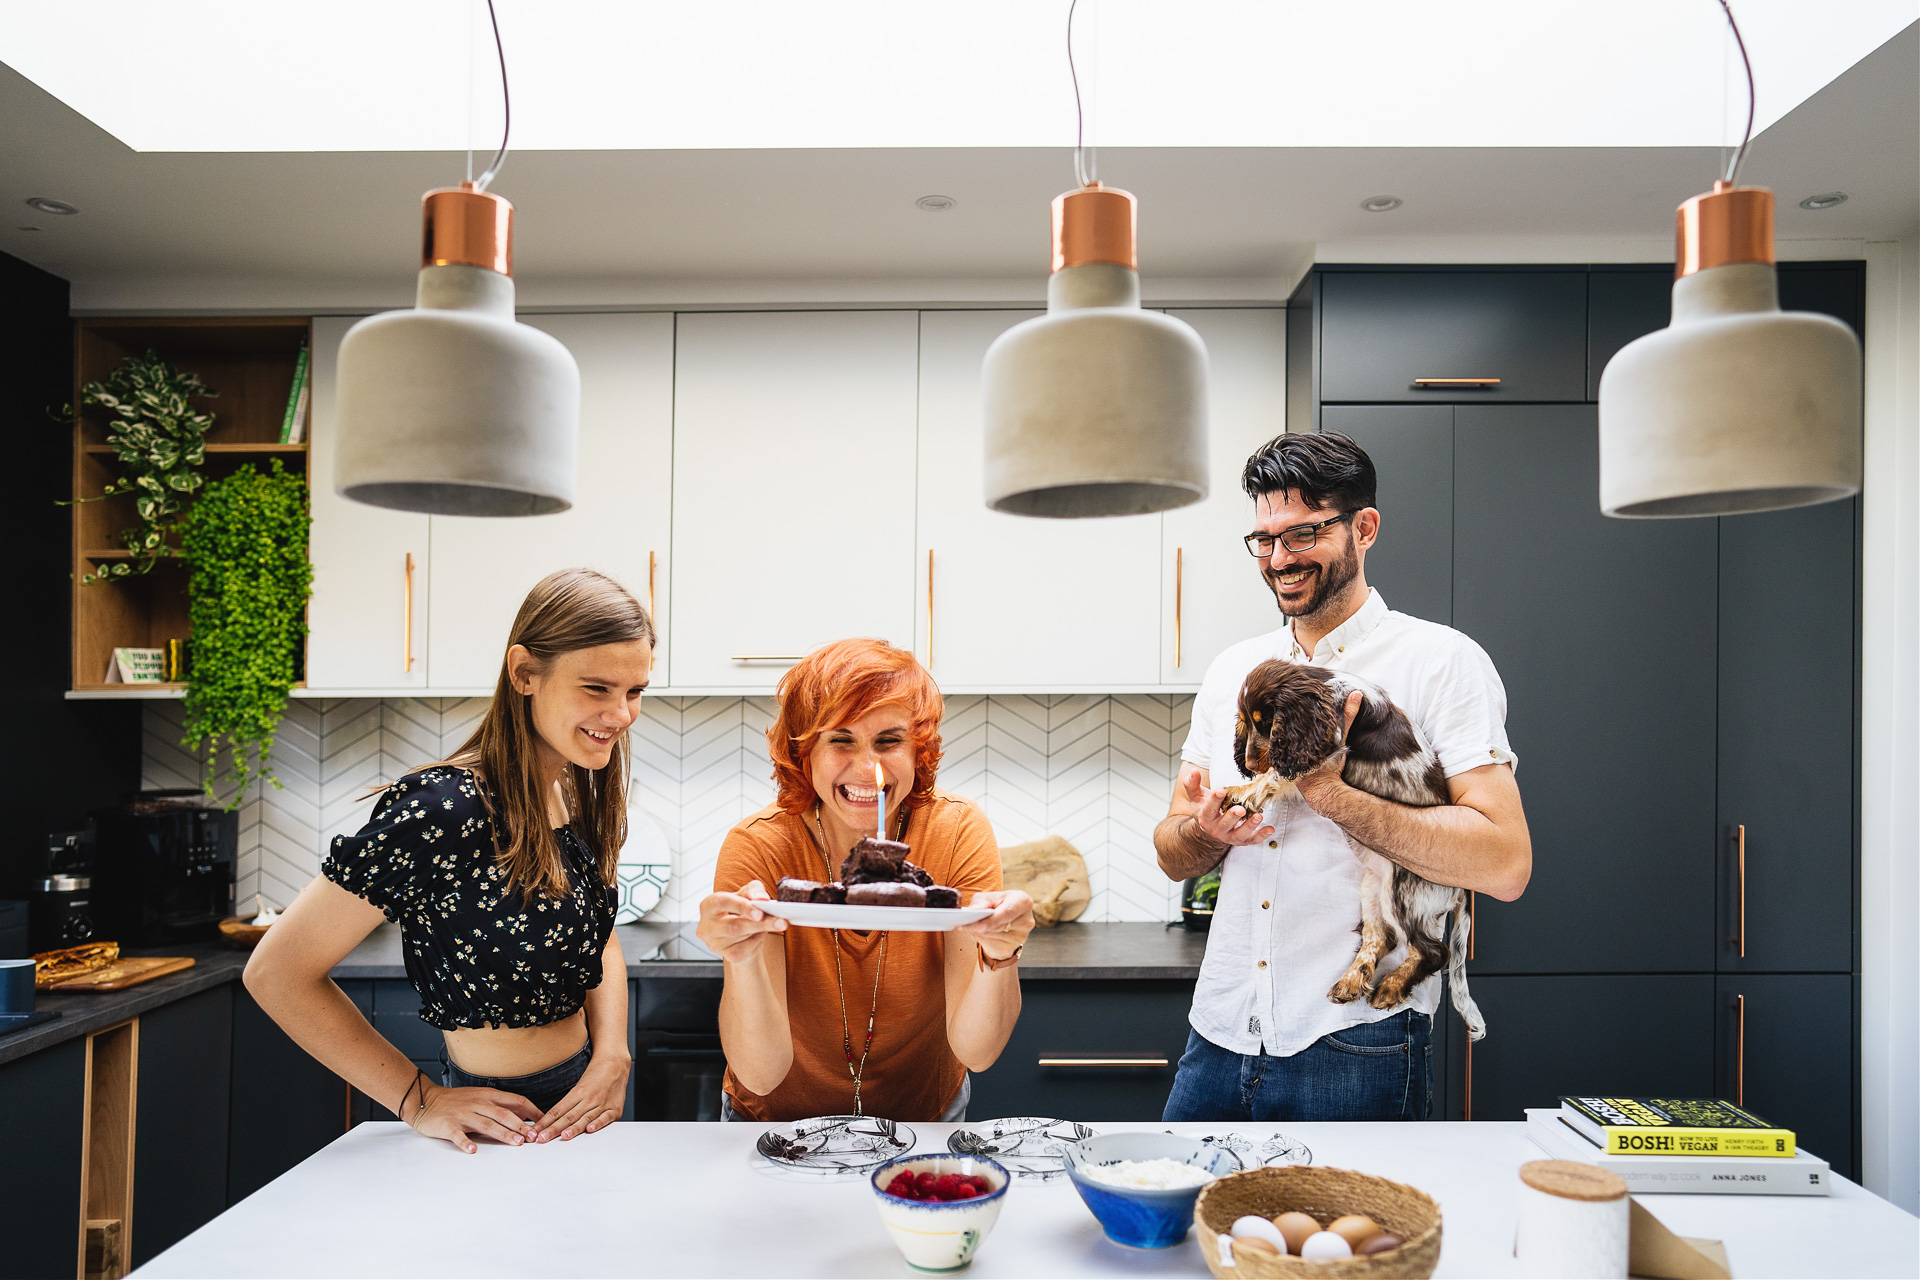 A woman laughing with a candle in a cake, with a man and dog watching and teenage girl, all standing in a beautiful kitchen together.